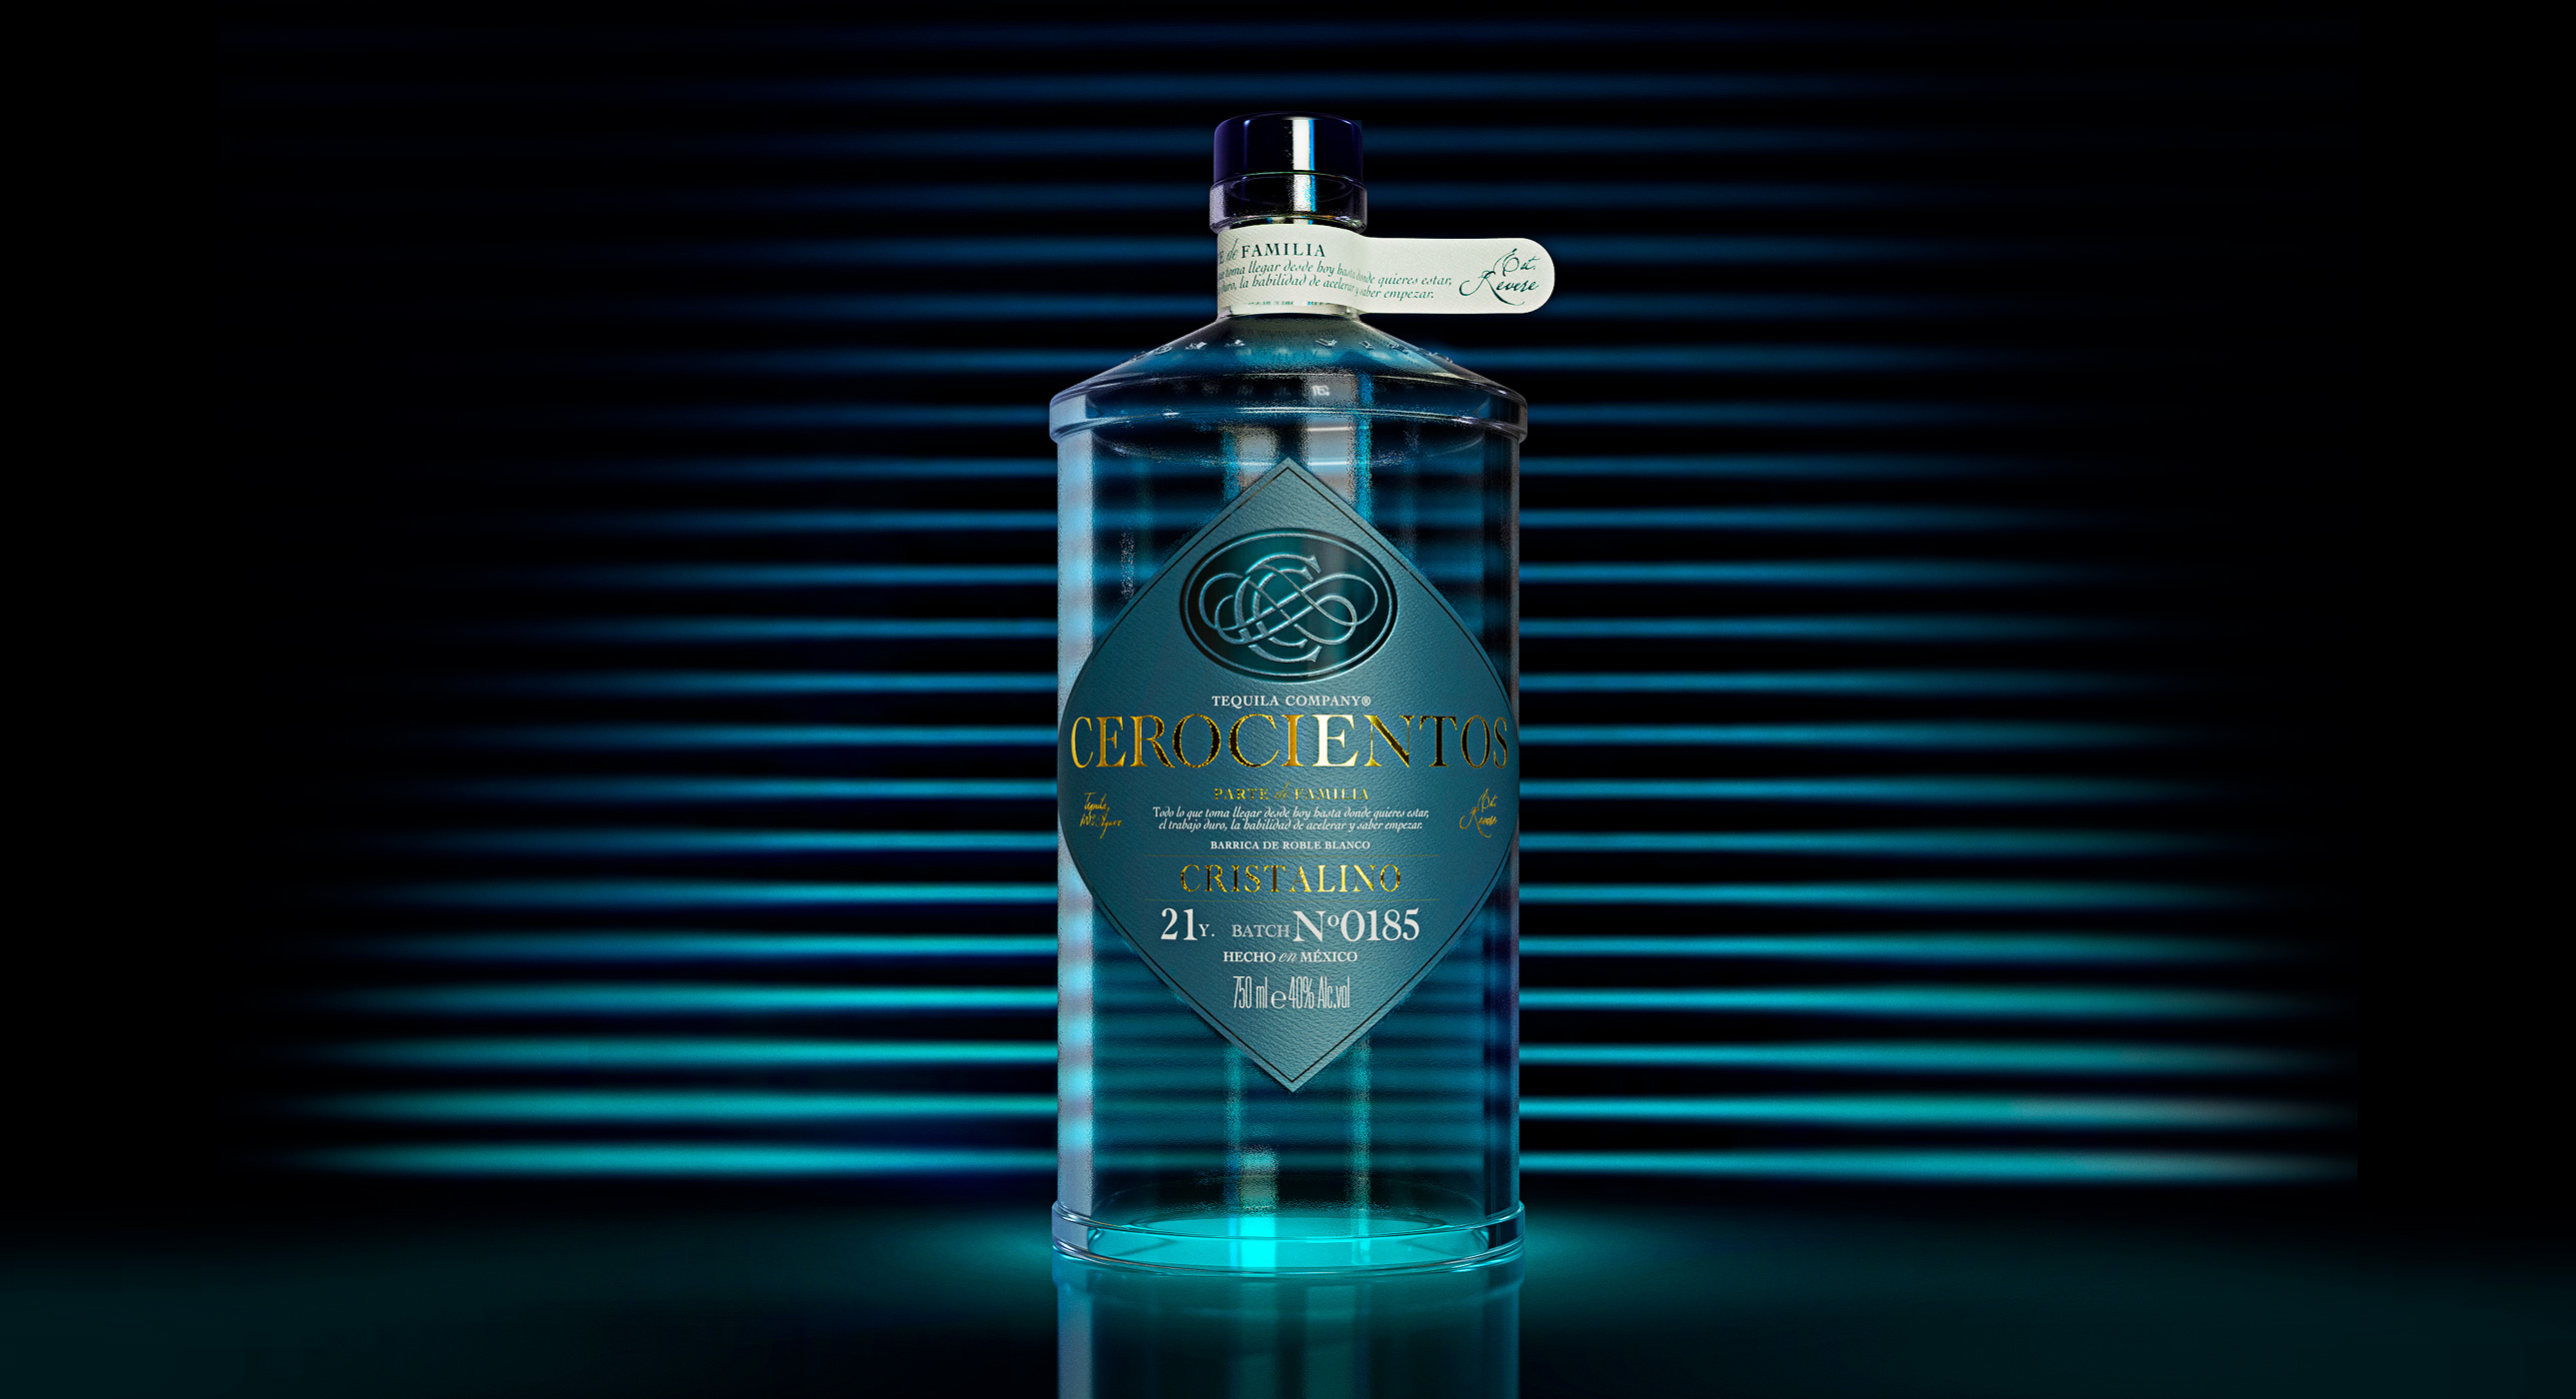 Brand Identity and Packaging Design for Tequila Cerocientos